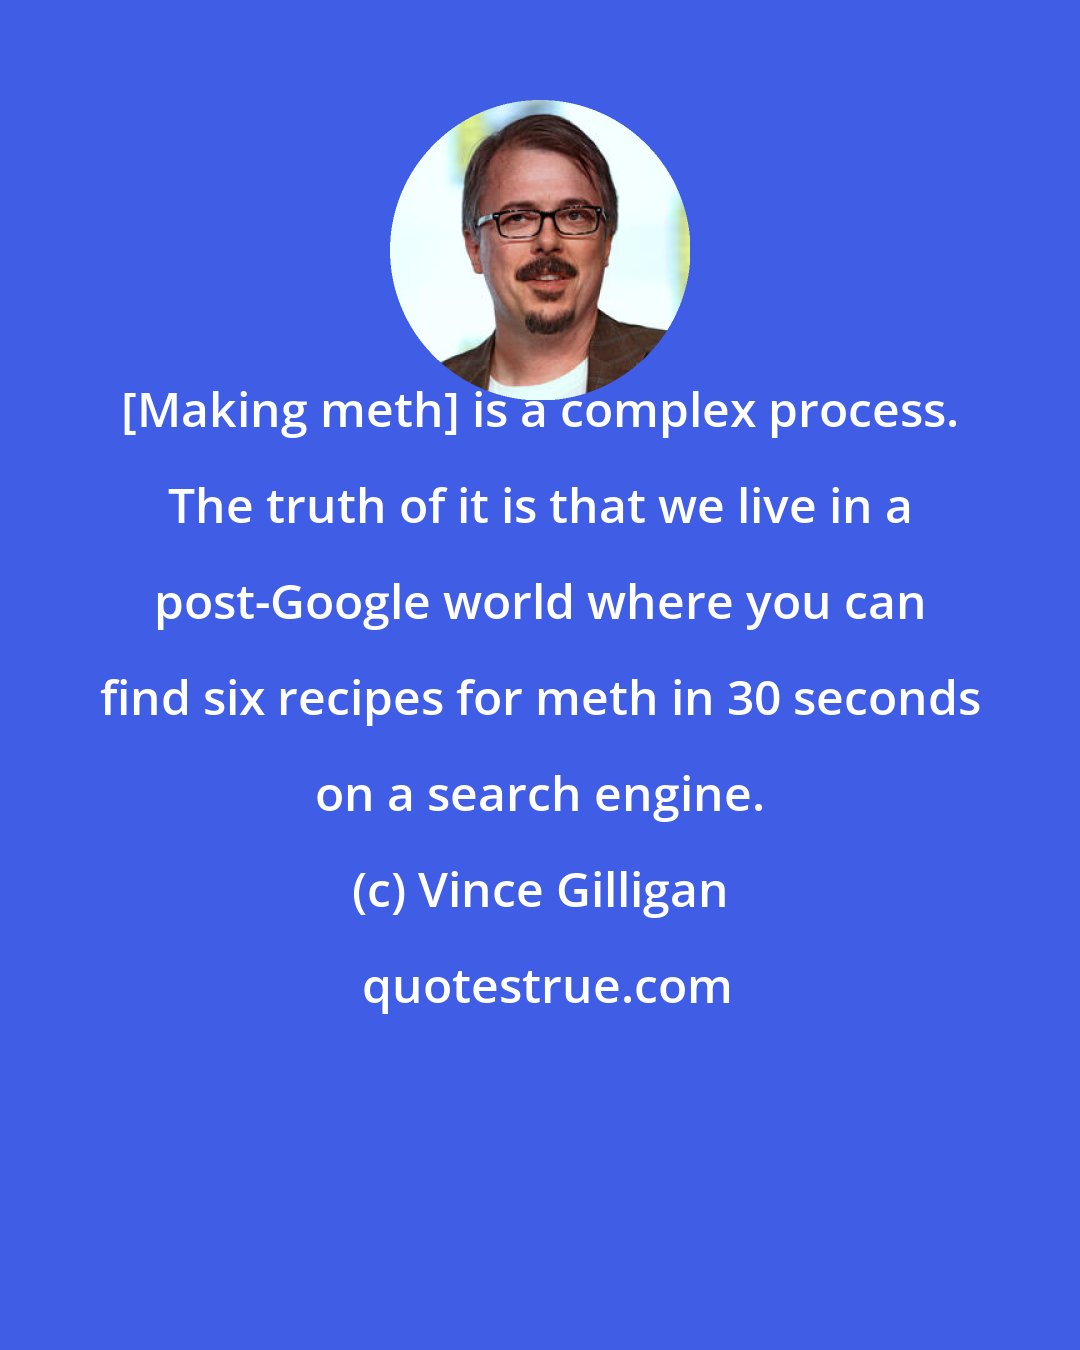 Vince Gilligan: [Making meth] is a complex process. The truth of it is that we live in a post-Google world where you can find six recipes for meth in 30 seconds on a search engine.